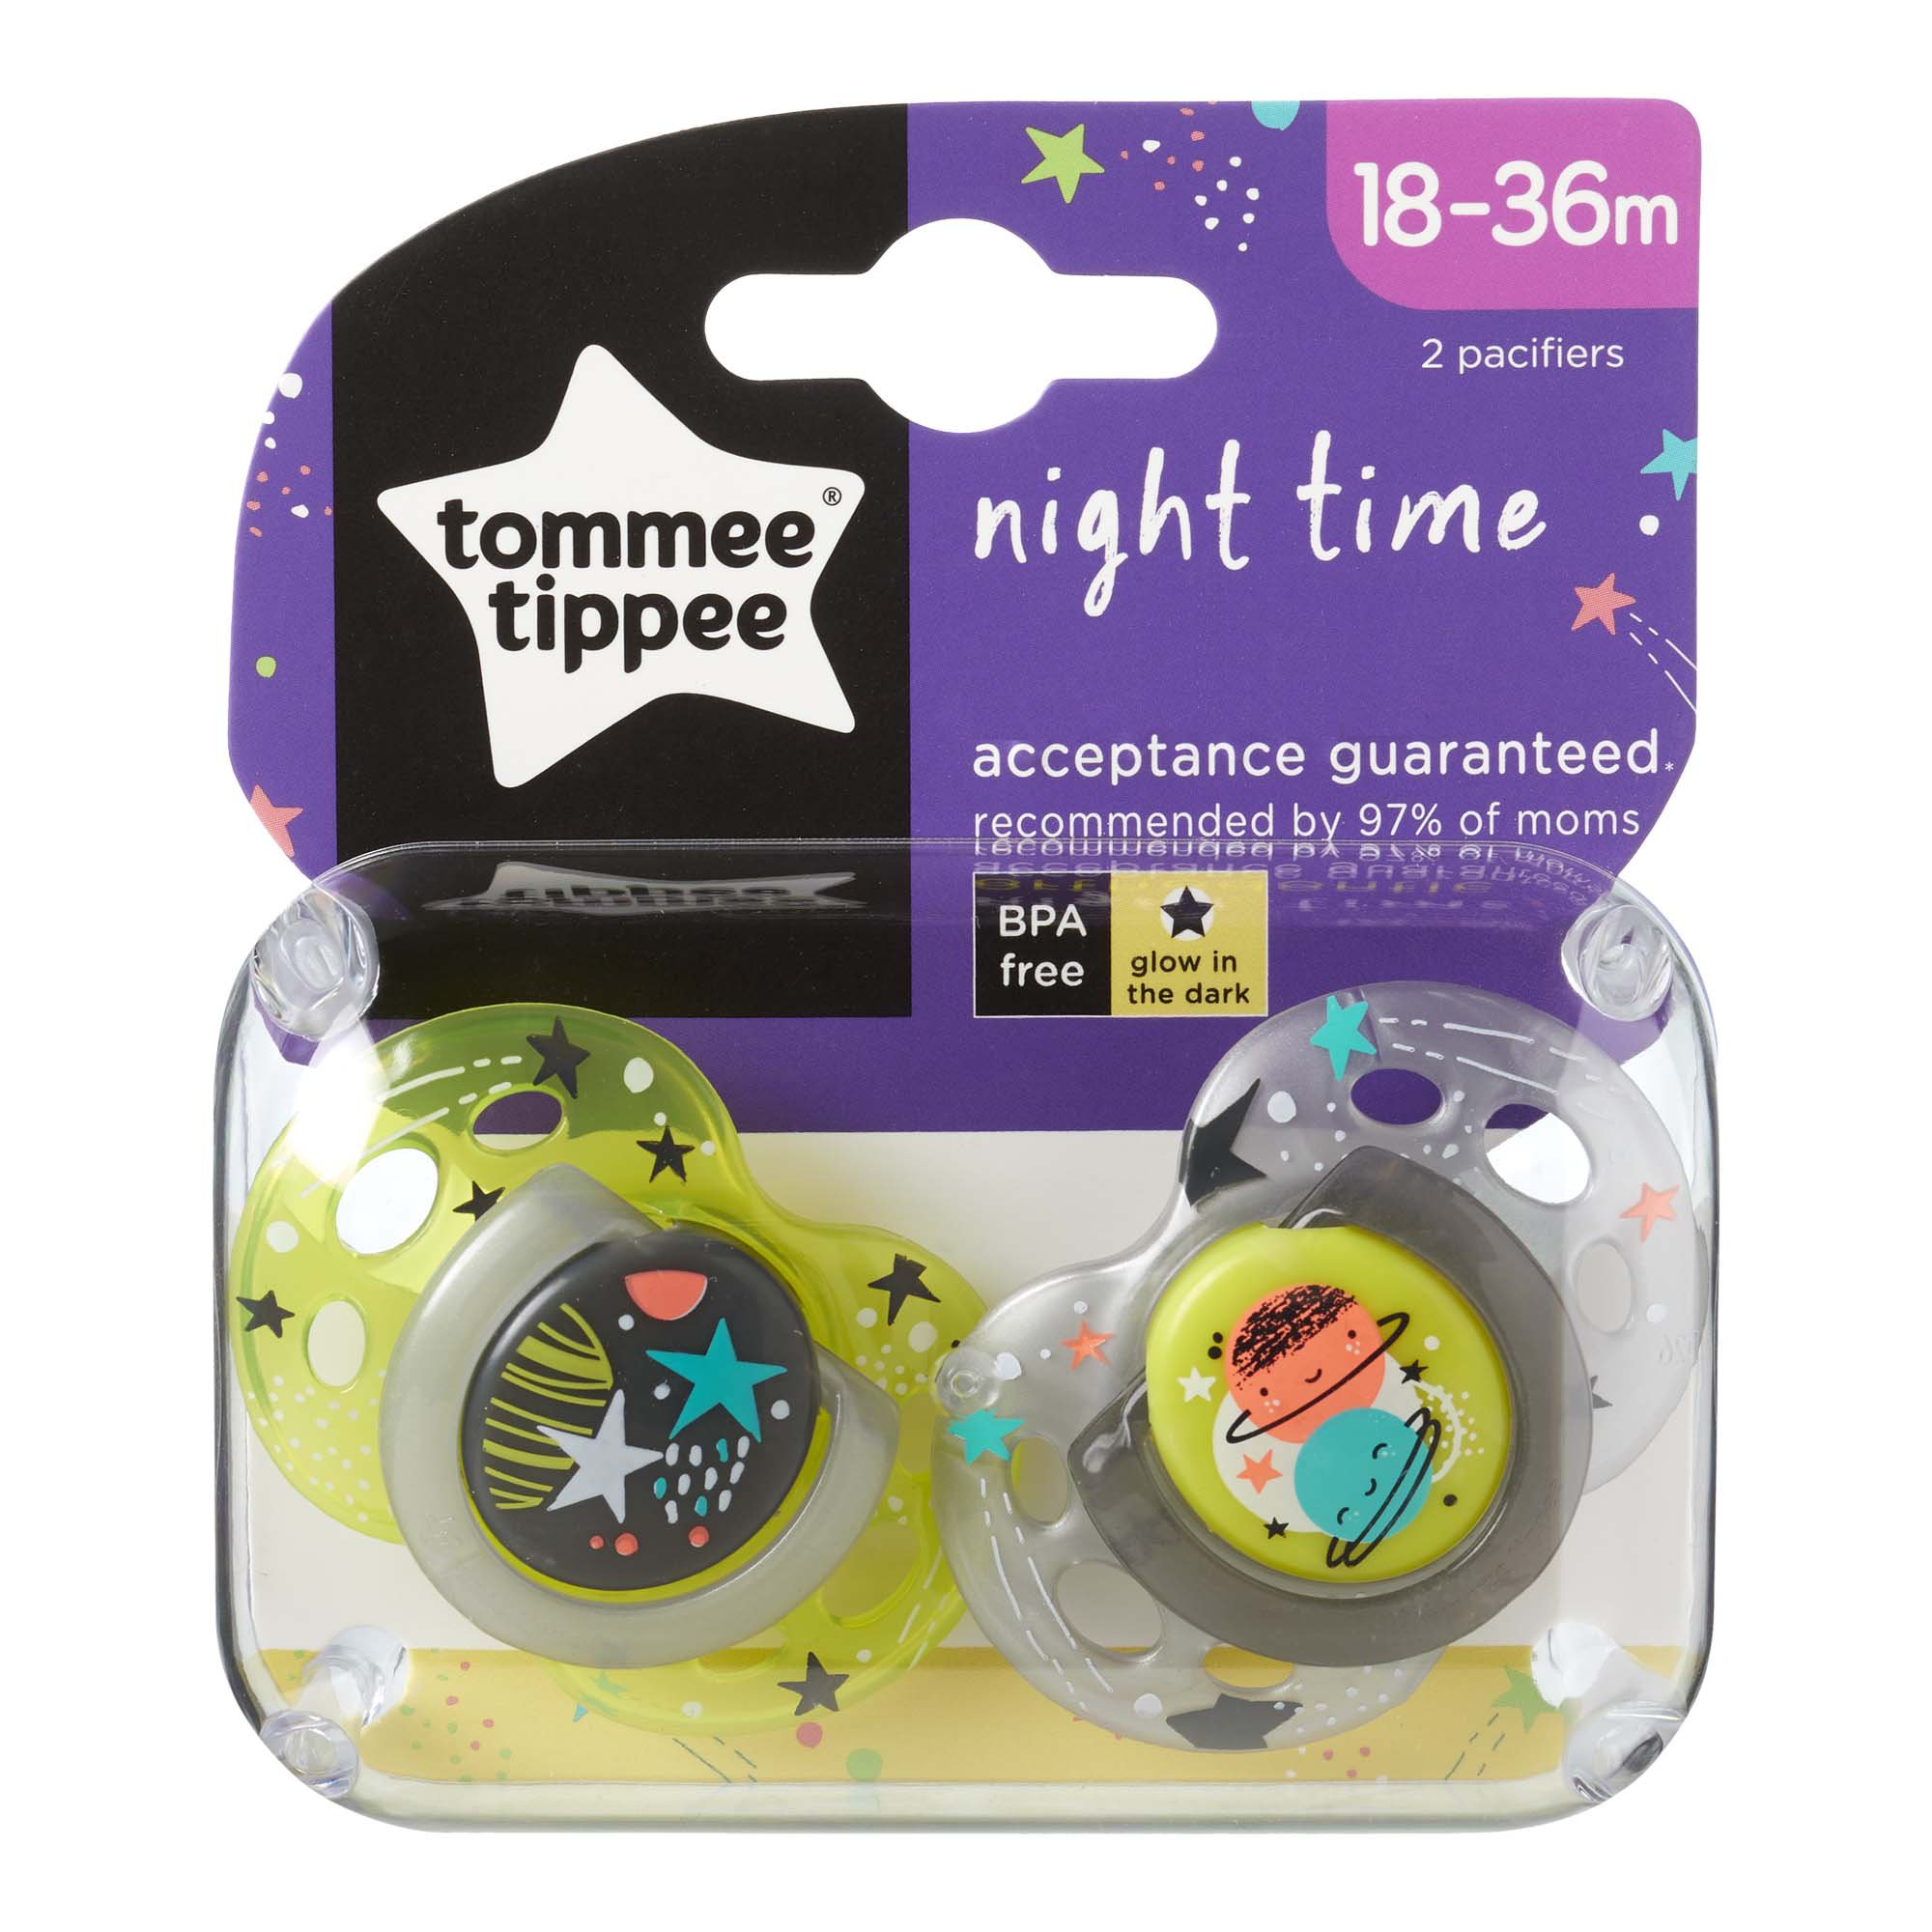 Chupete Nightime Tommee Tippee 0-6m/6-18m/18-36m Full